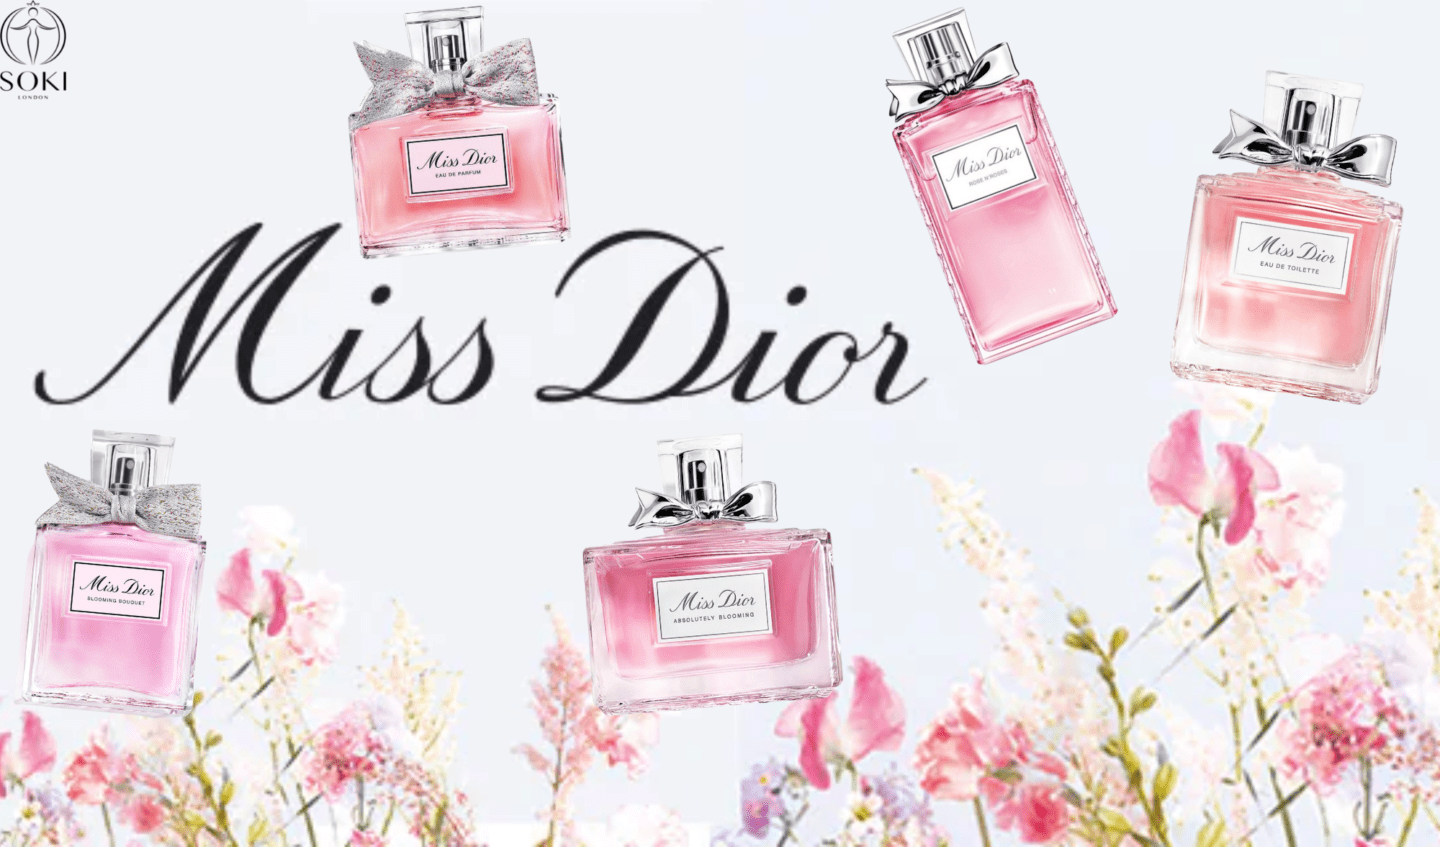 Miss Dior Perfume Review
The Top Ten Best Selling Perfumes In The World